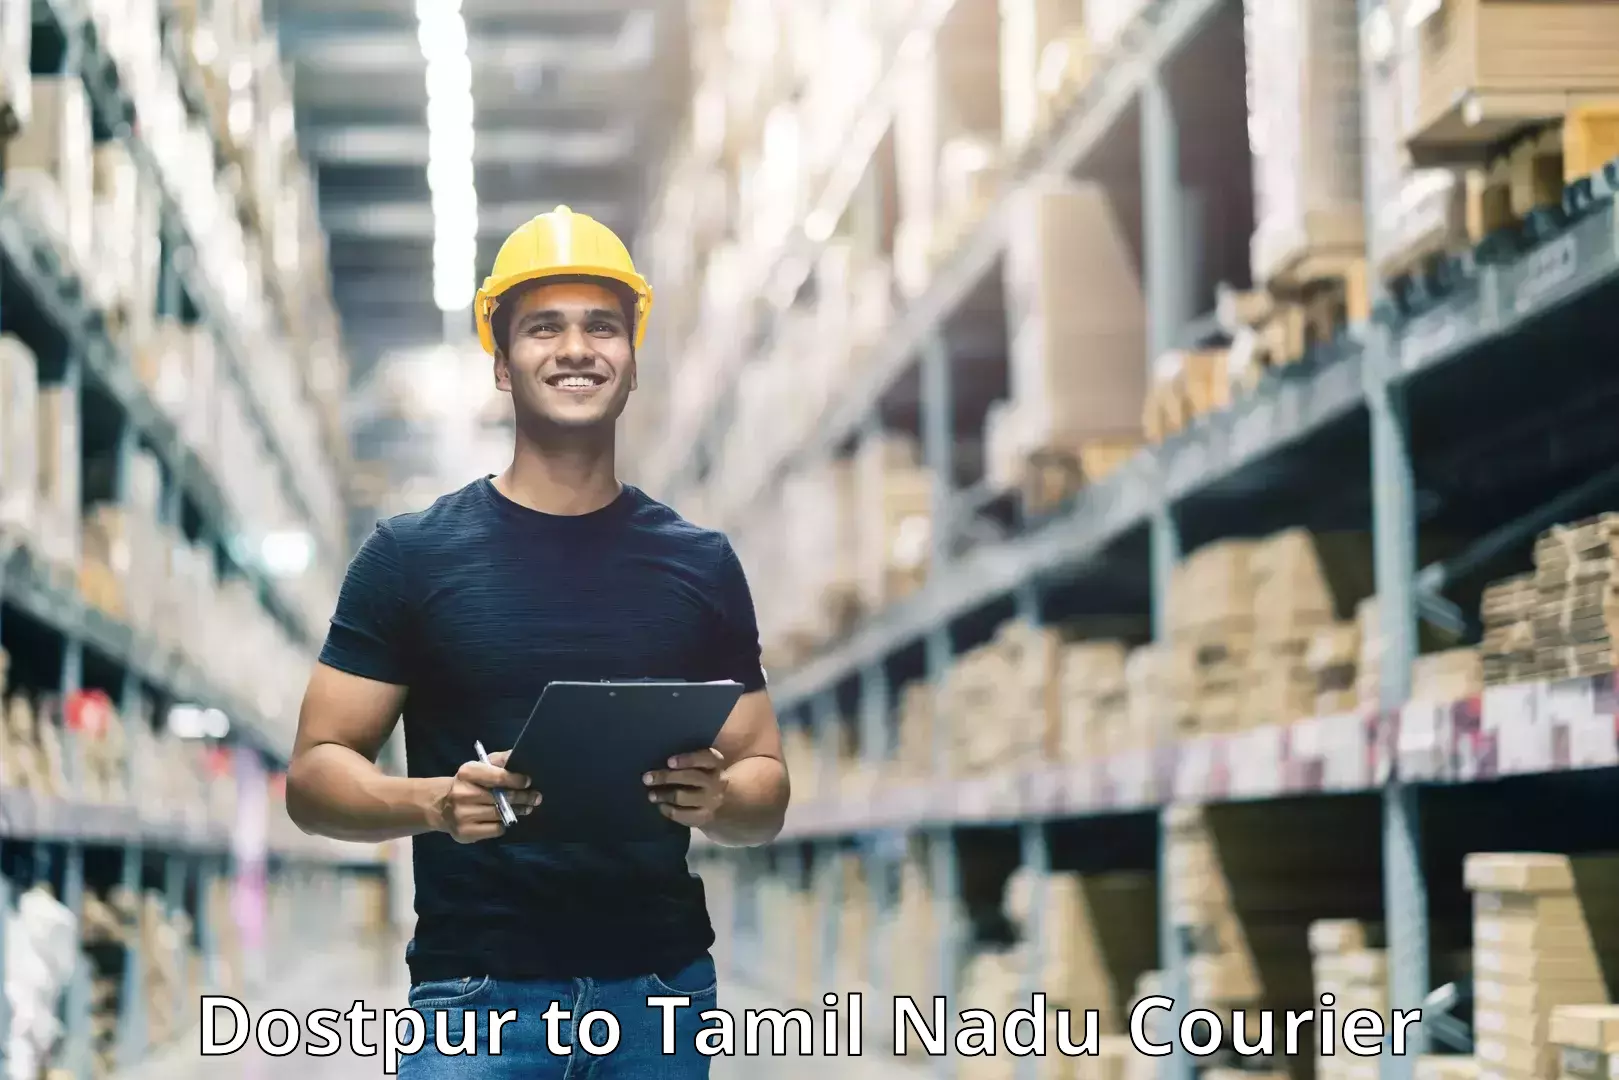 Automated parcel services Dostpur to Vellore Institute of Technology